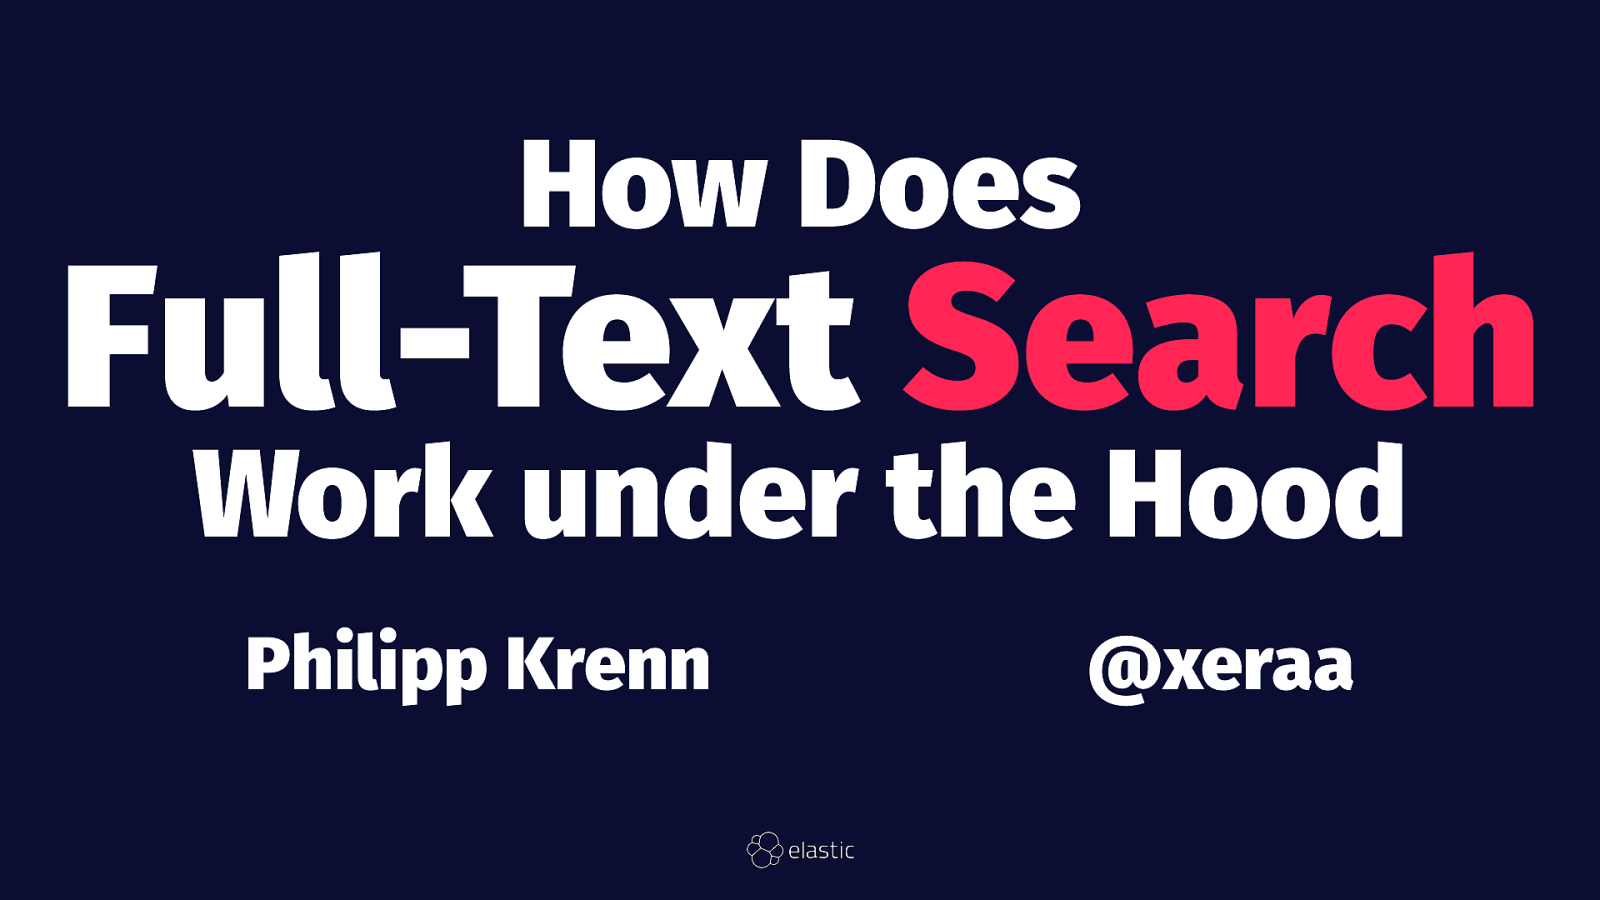 How Does Full-text Search Work Under the Hood